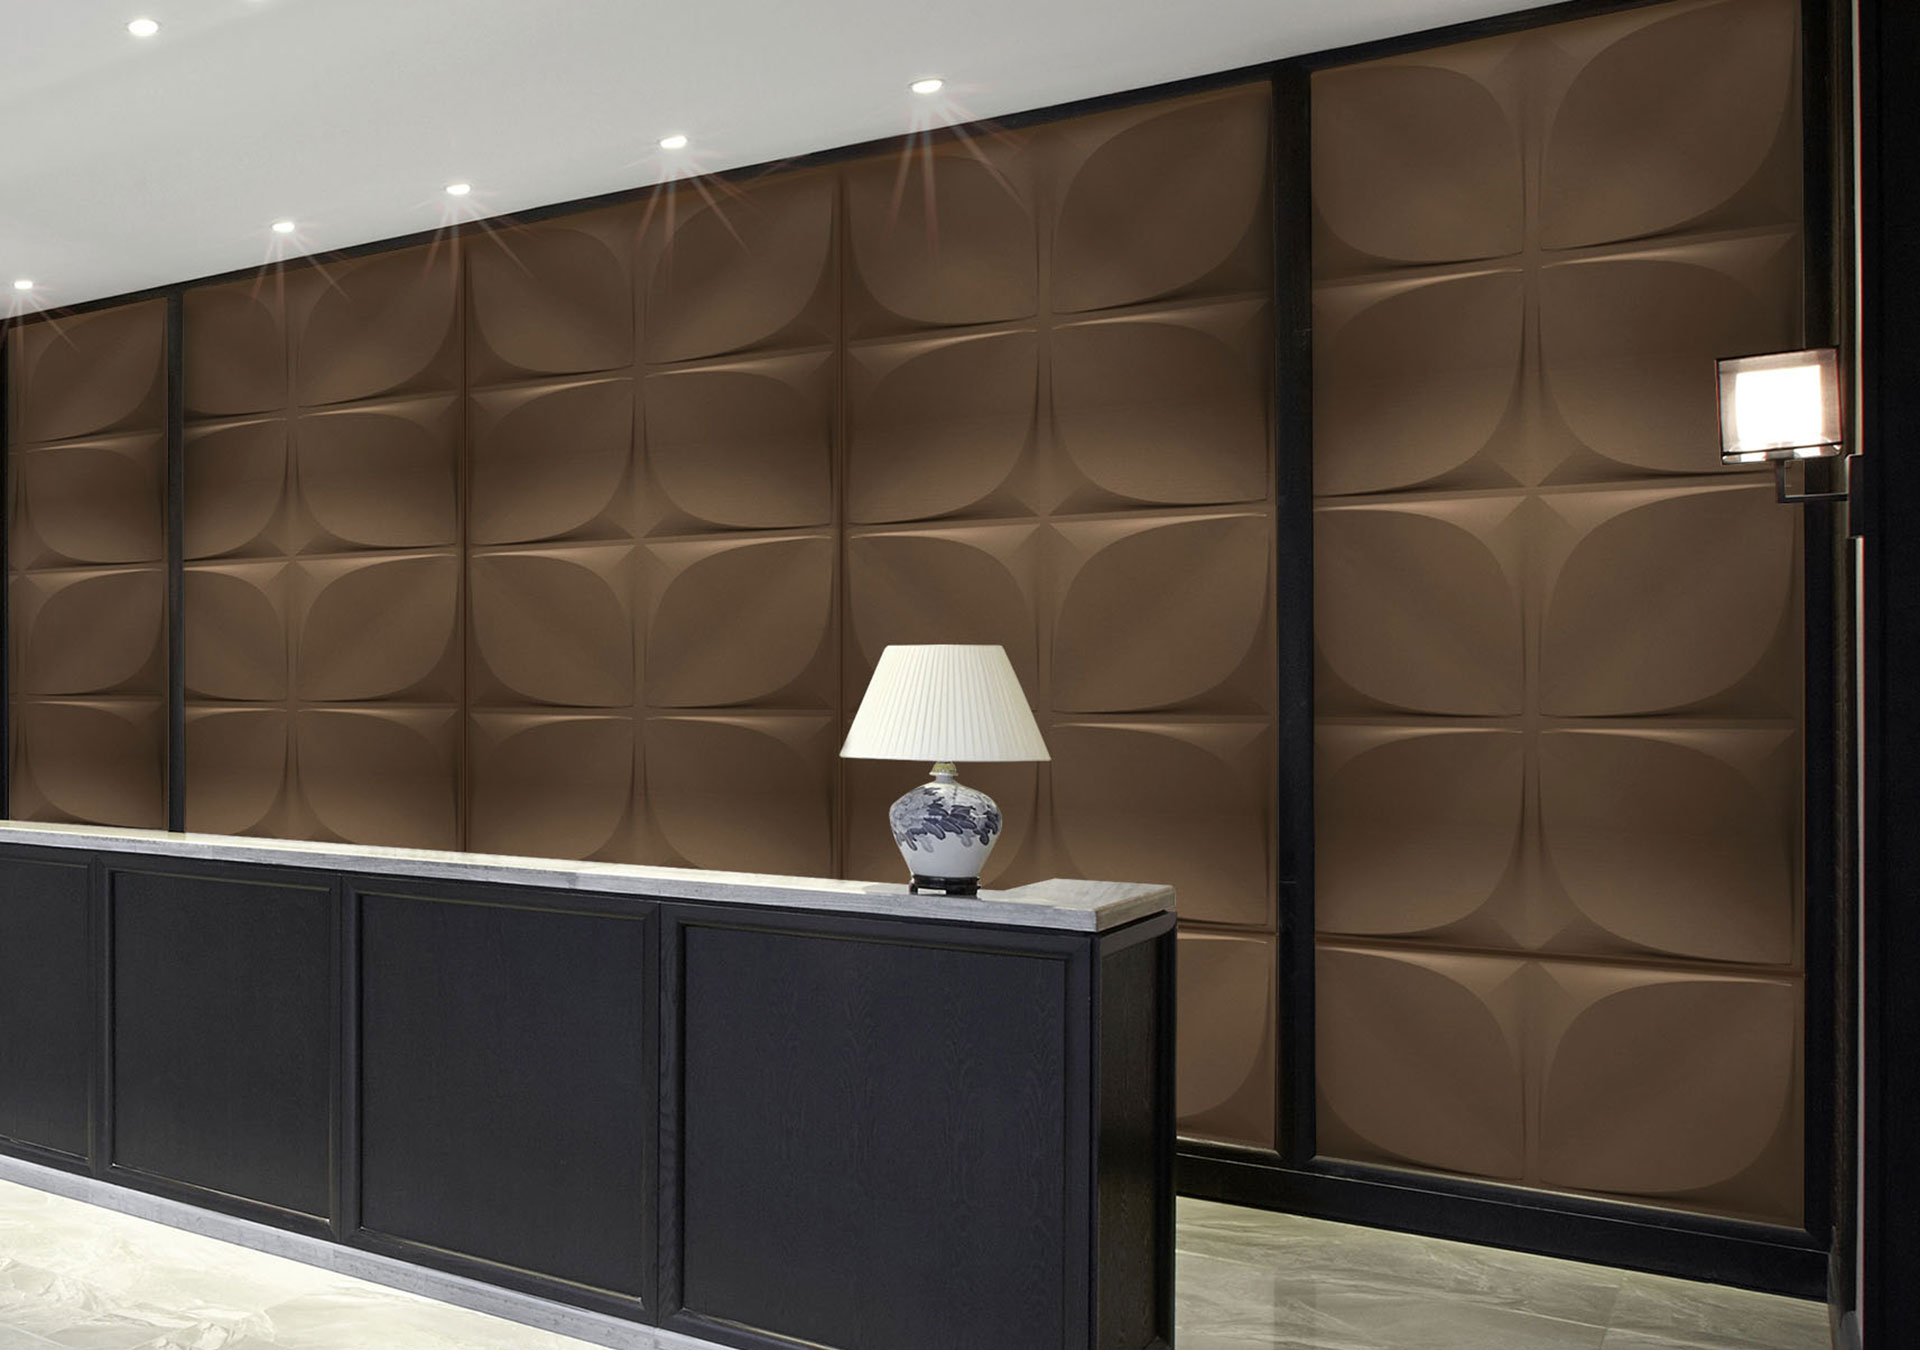 Decorative Ceiling Tiles Inc : Pin By Decorative Ceiling Tiles Inc On